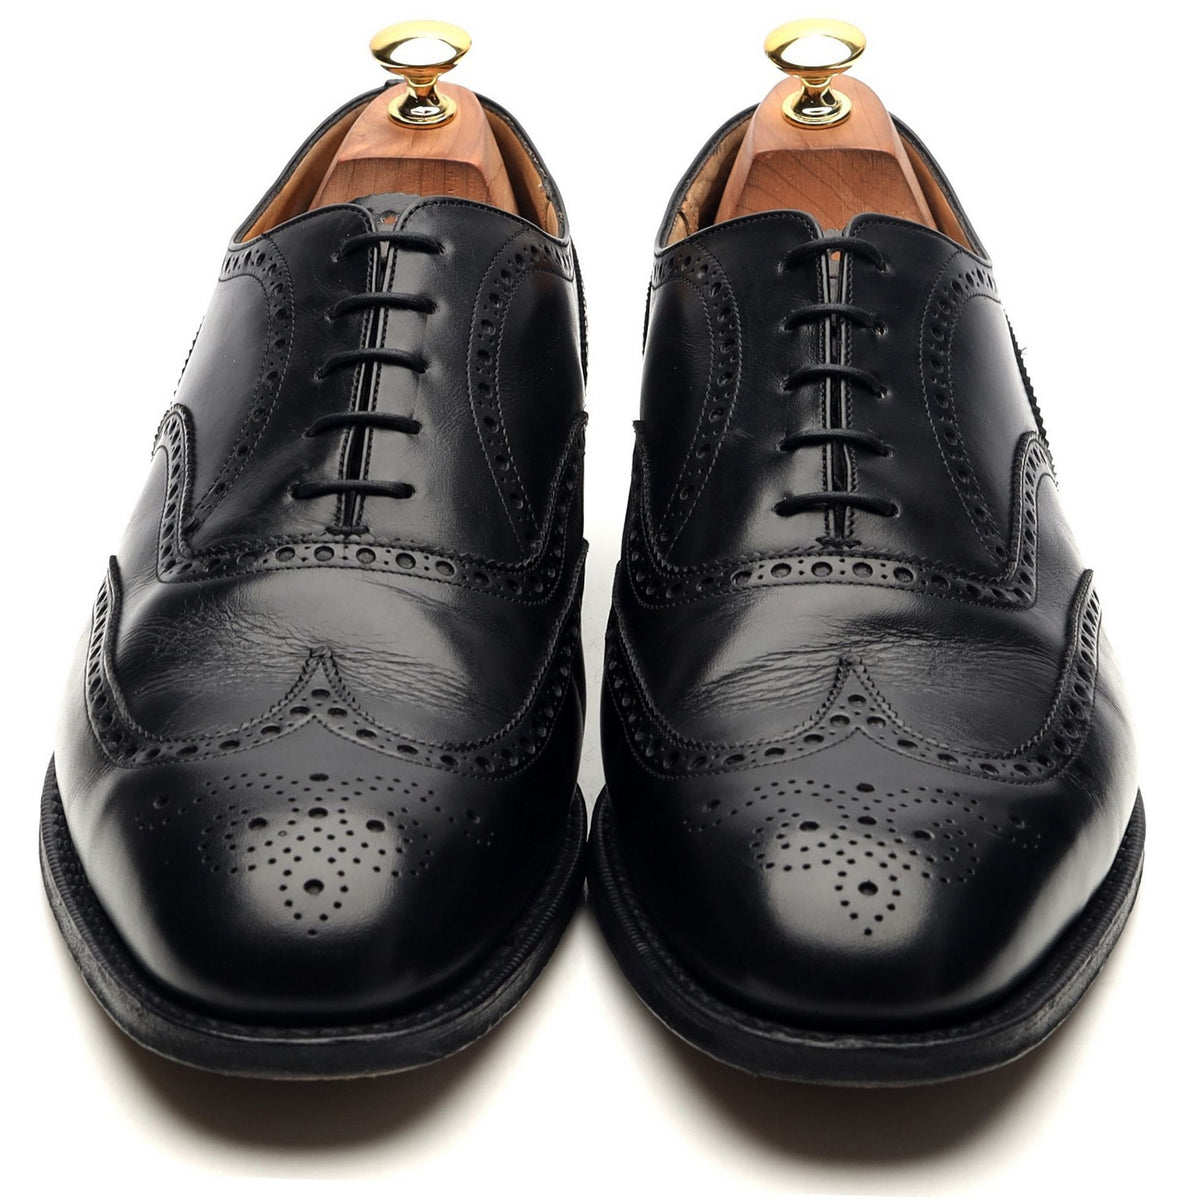 &#39;Chetwynd&#39; Black Leather Oxford Brogues UK 10.5 G